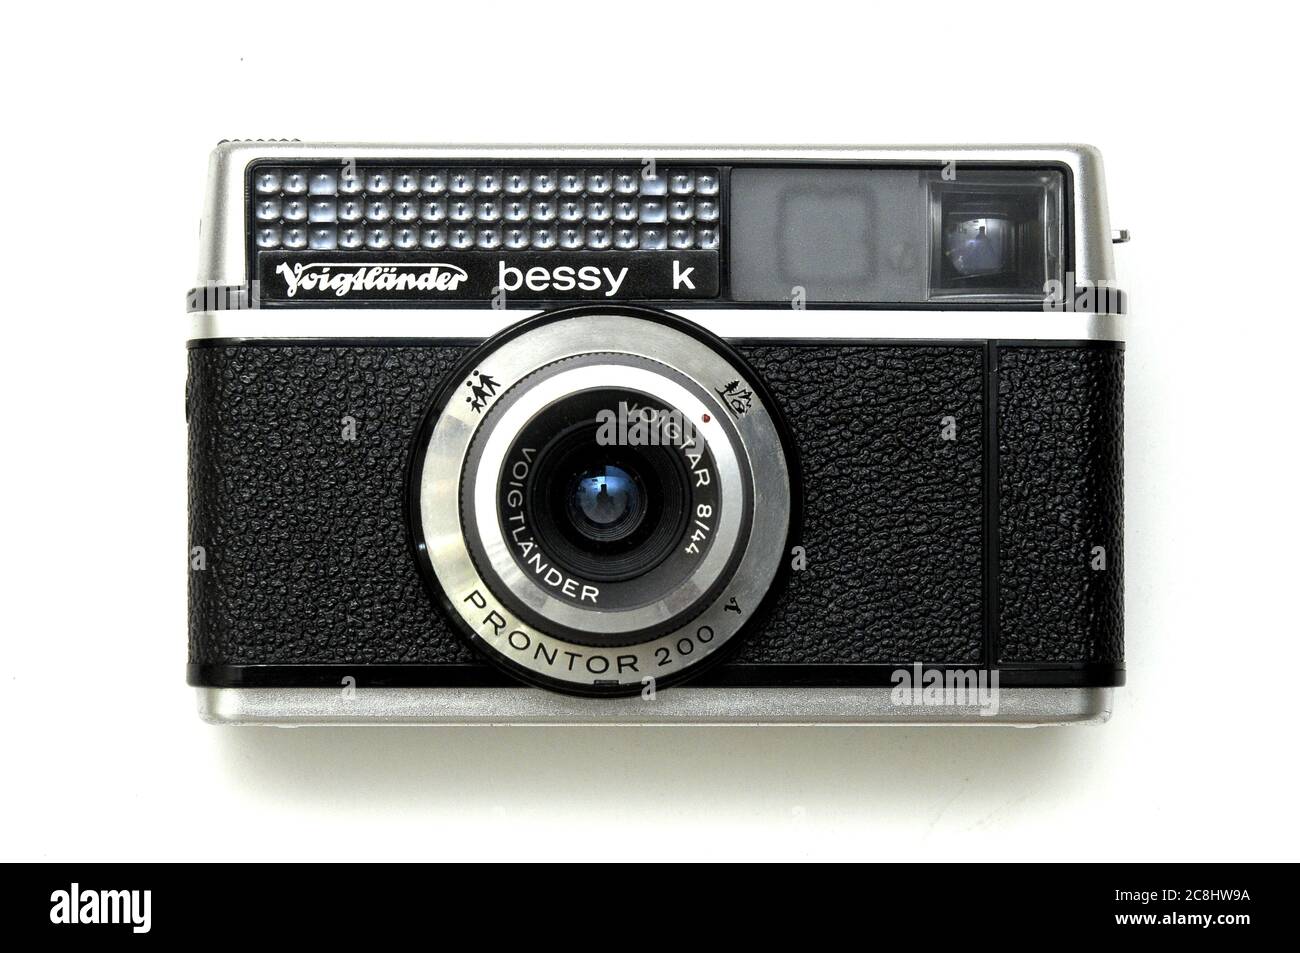 OLD CAMERA VOIGTLÄNDER BESSY K, Vintage, art, photography, second hand, used, old camera, retro, made in West Germany, 1965, Stock Photo